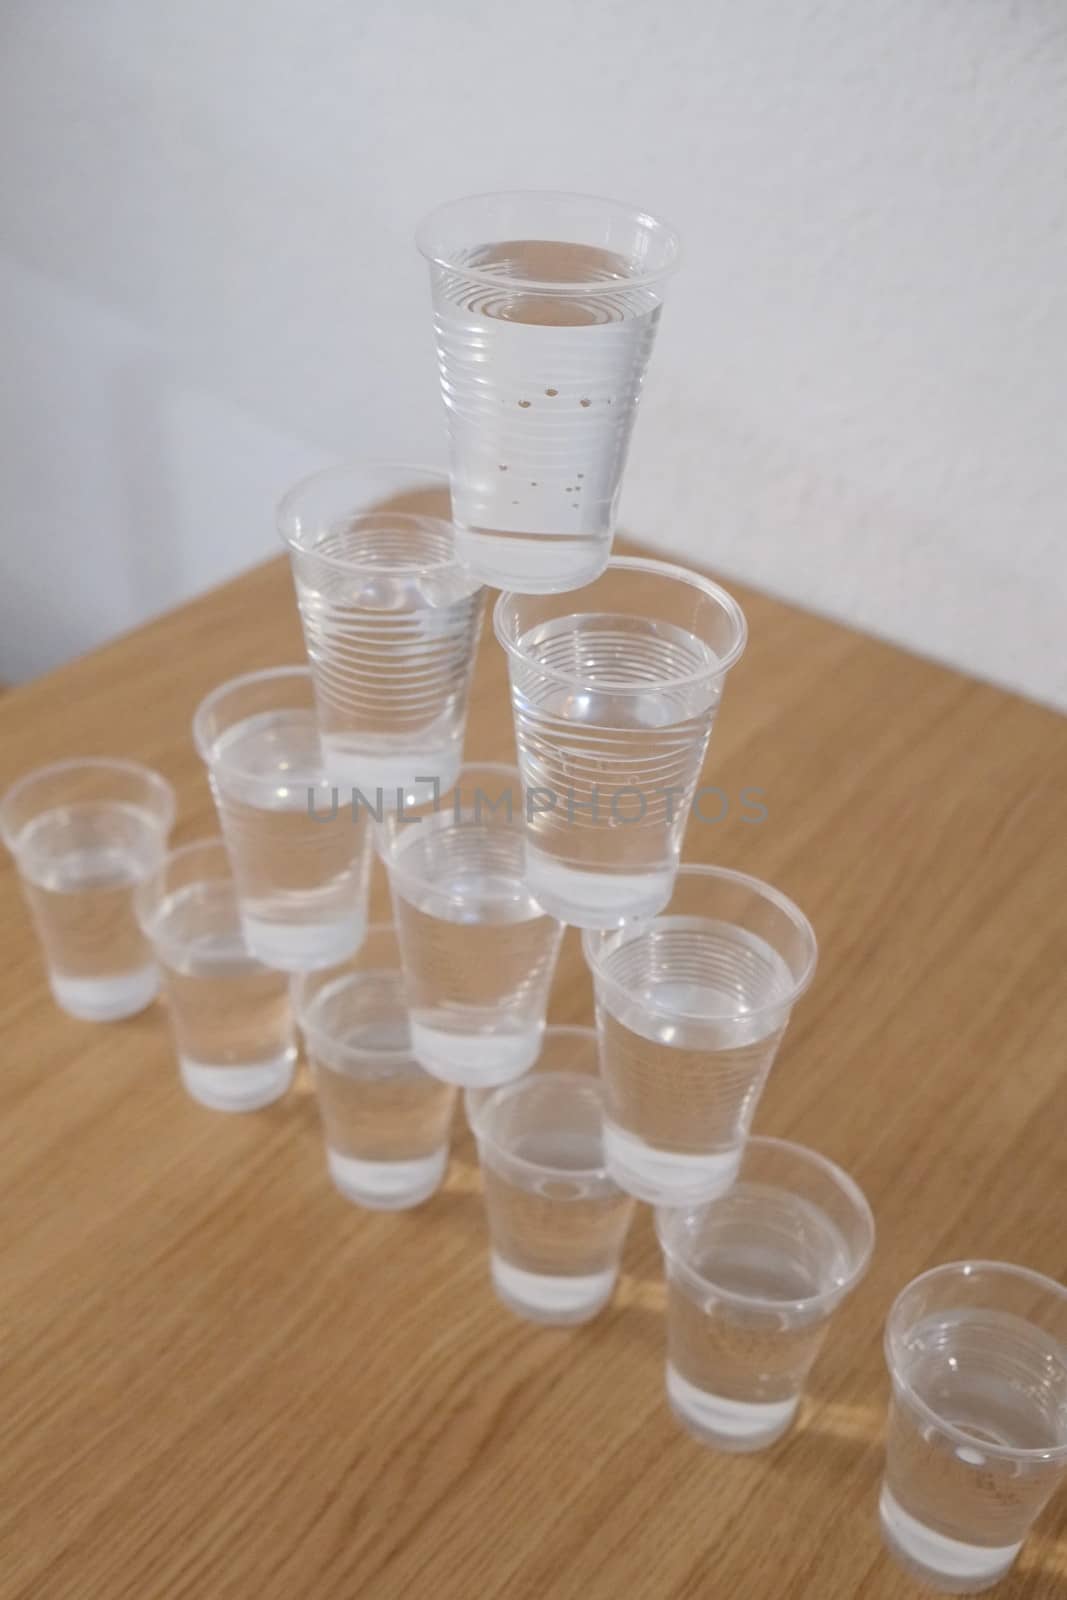 pyramid made of fresh glasses of water